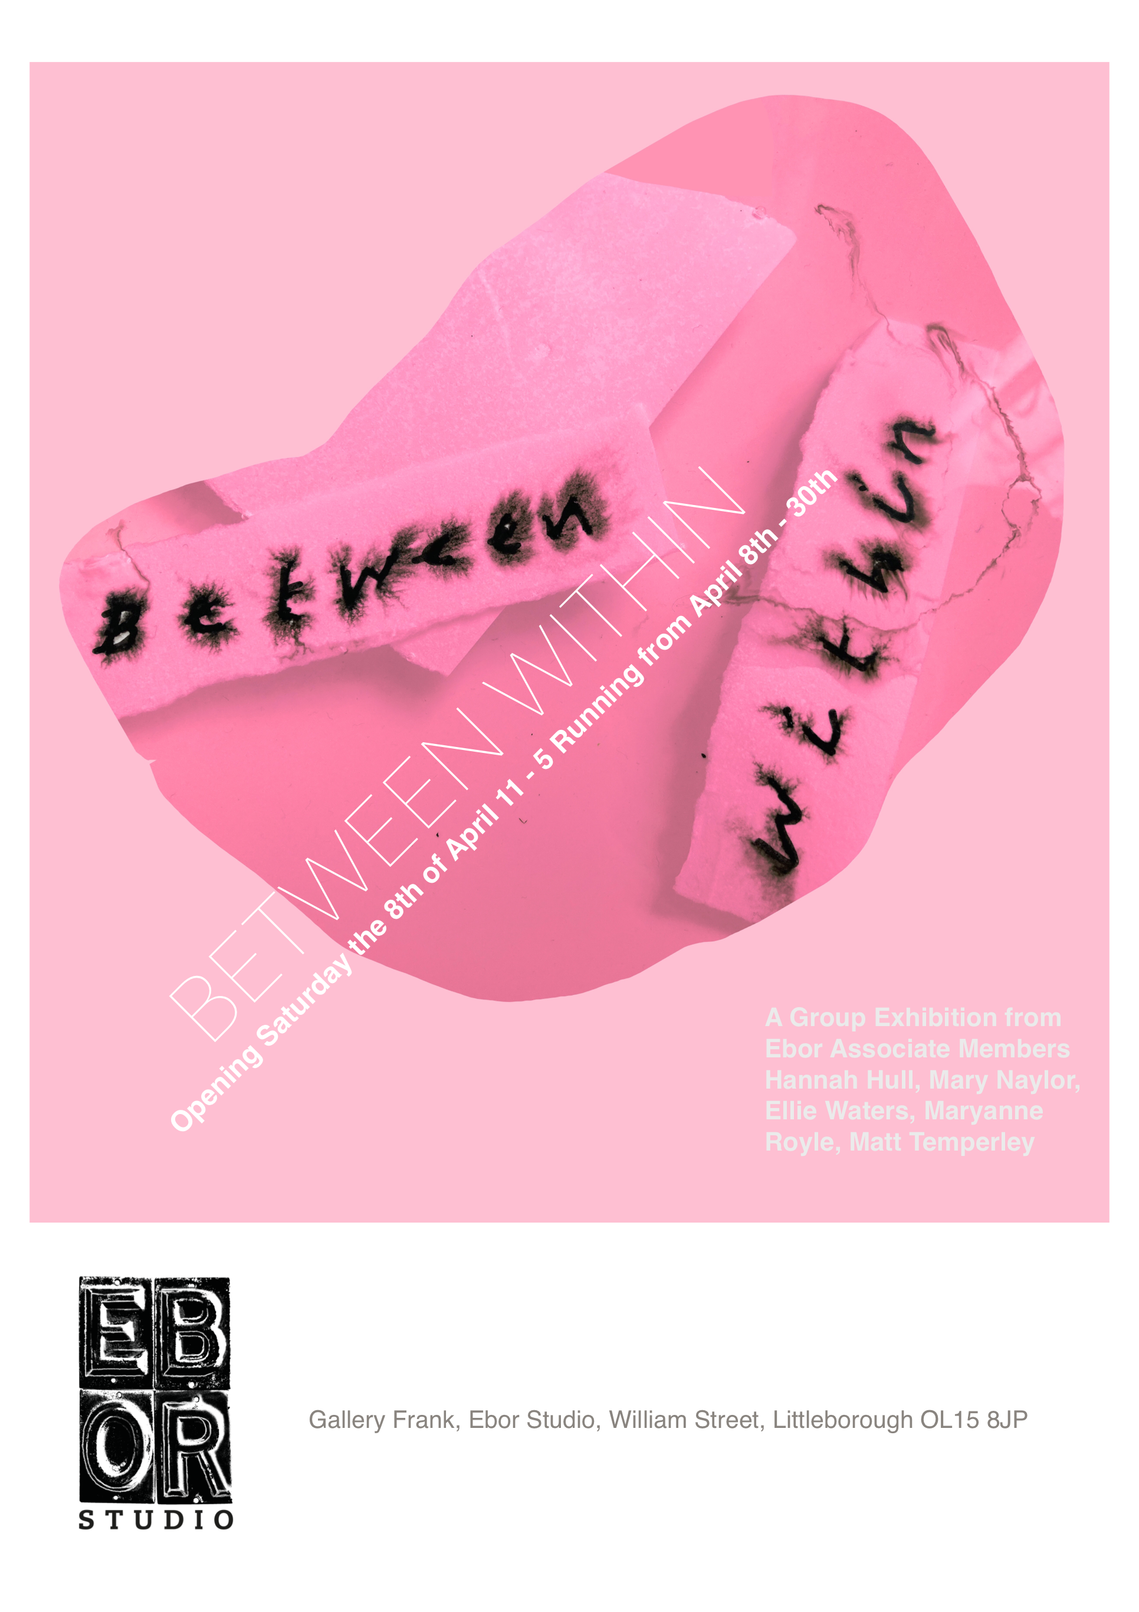 Exhibition poster design of a pink ambiguous shape on which displays some handwritten black text which reads ‘between within’ the ink is bleeding. This is laid on top of a lighter pink background. There is an Ebor Studio logo in the top left corner. 